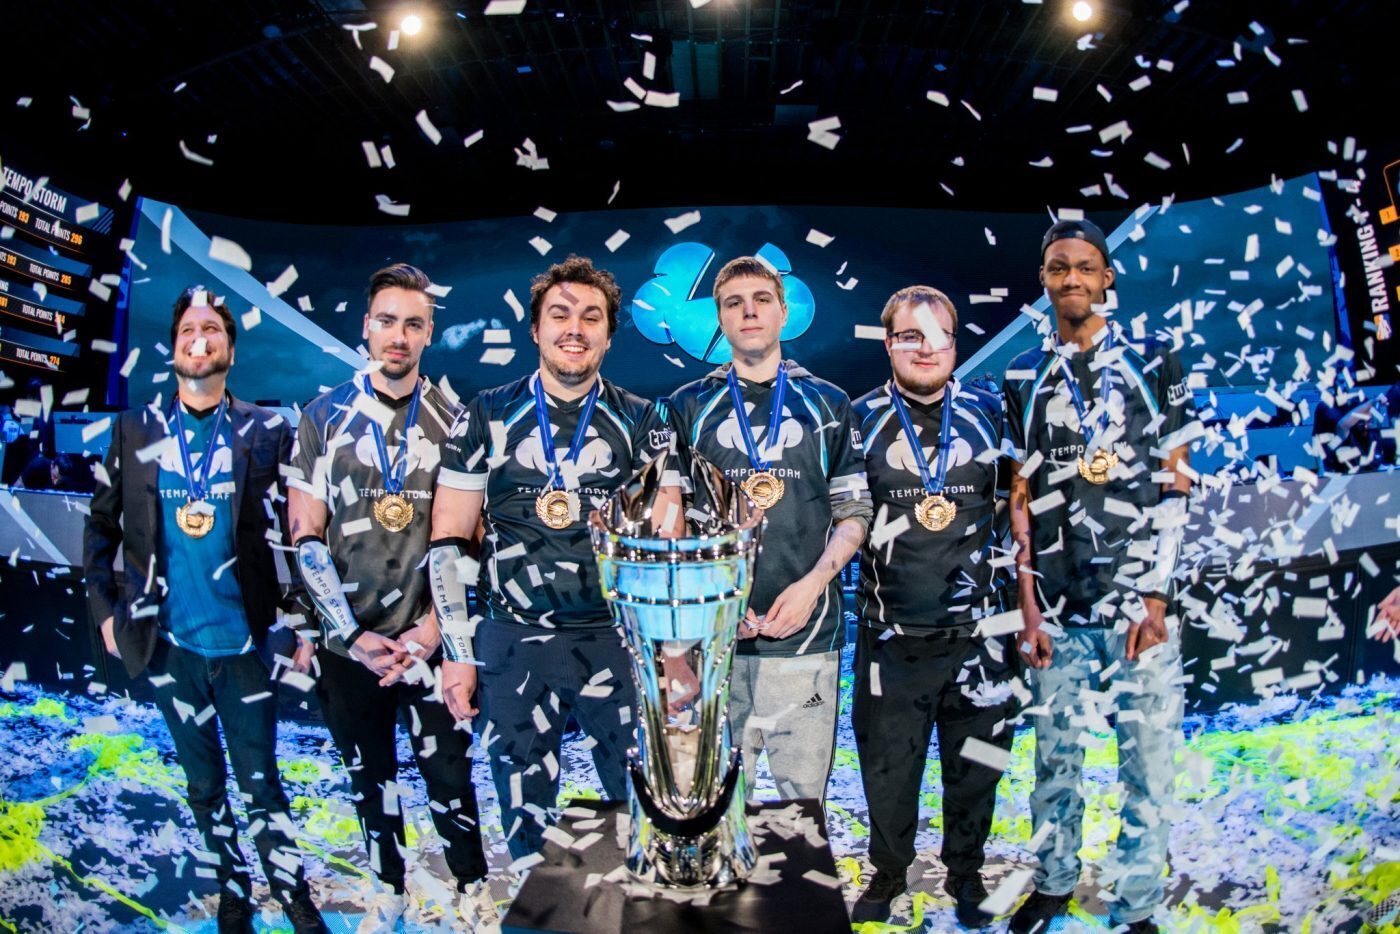 Tempo Storm took home the trophy in the NPL's Phase 2. (Image courtesy of @PUBGEsports / Twitter)